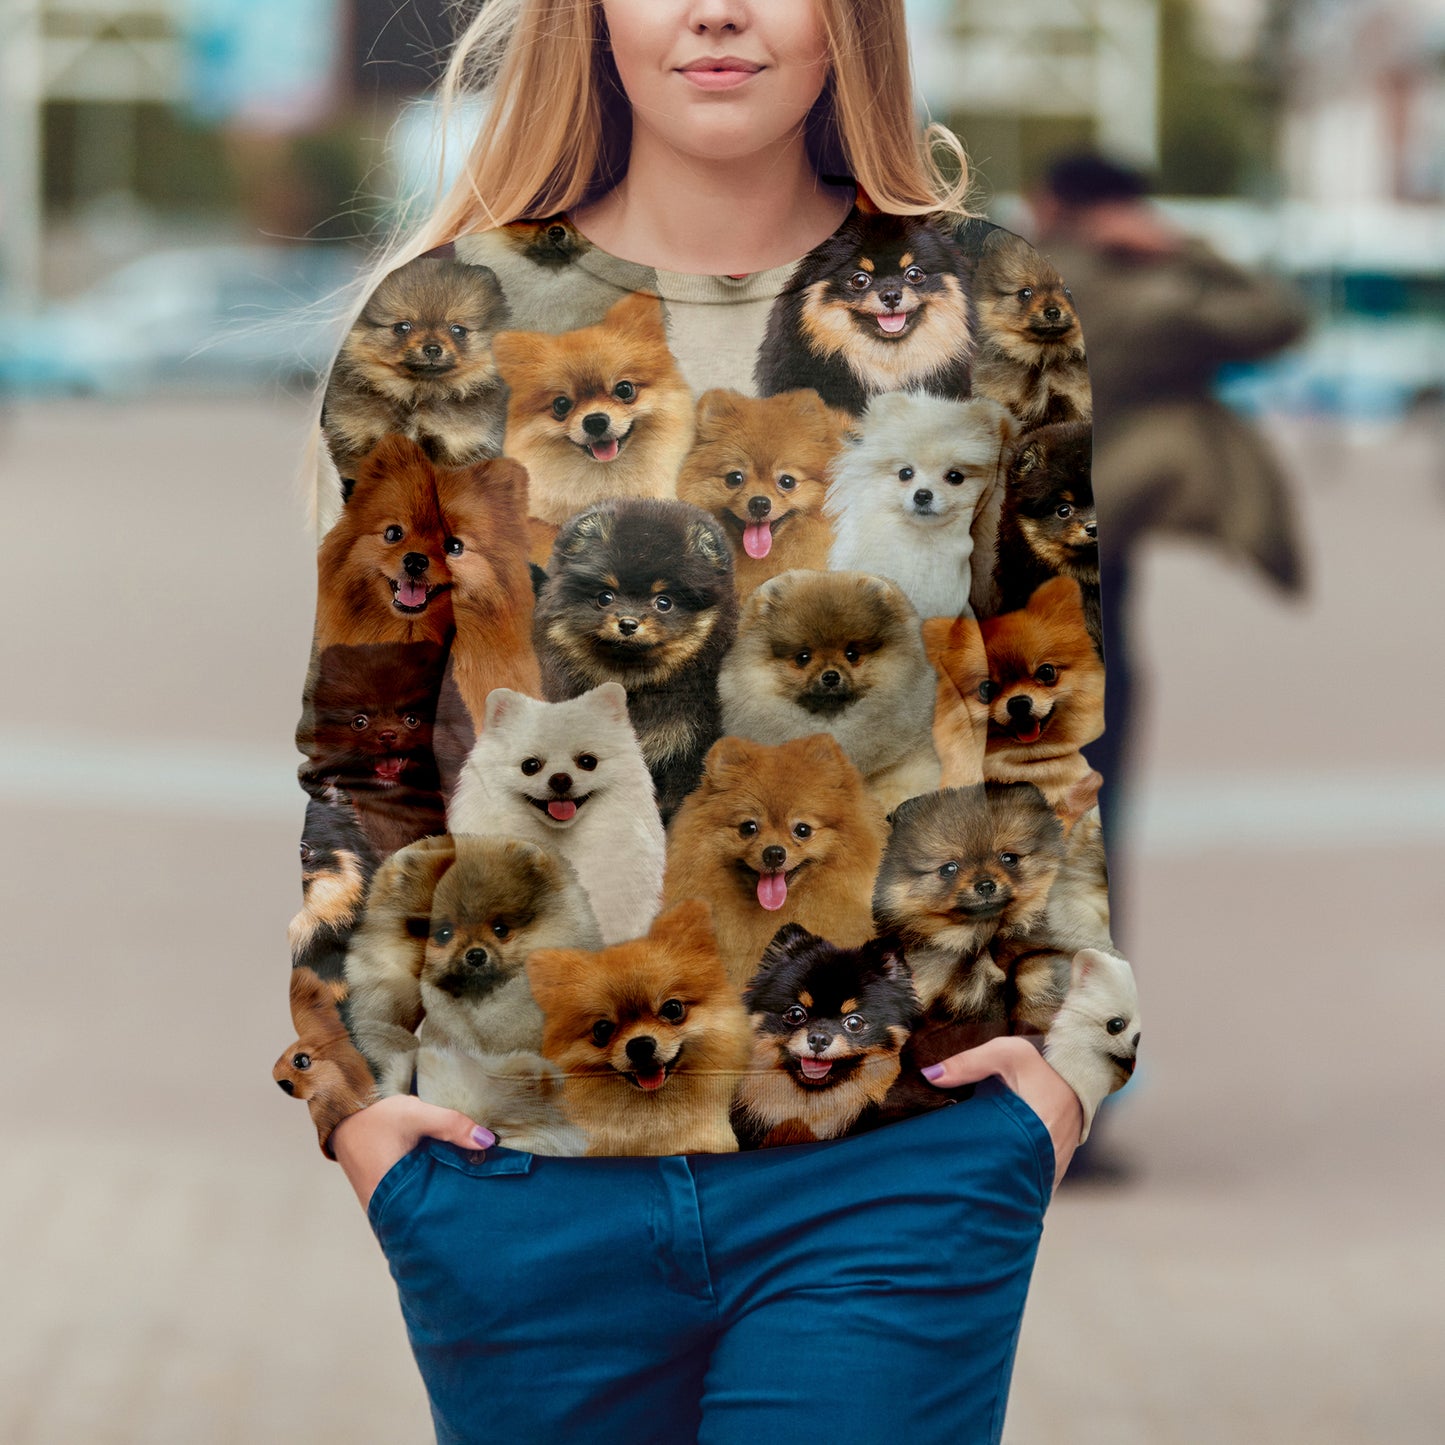 You Will Have A Bunch Of Pomeranians - Sweatshirt V1